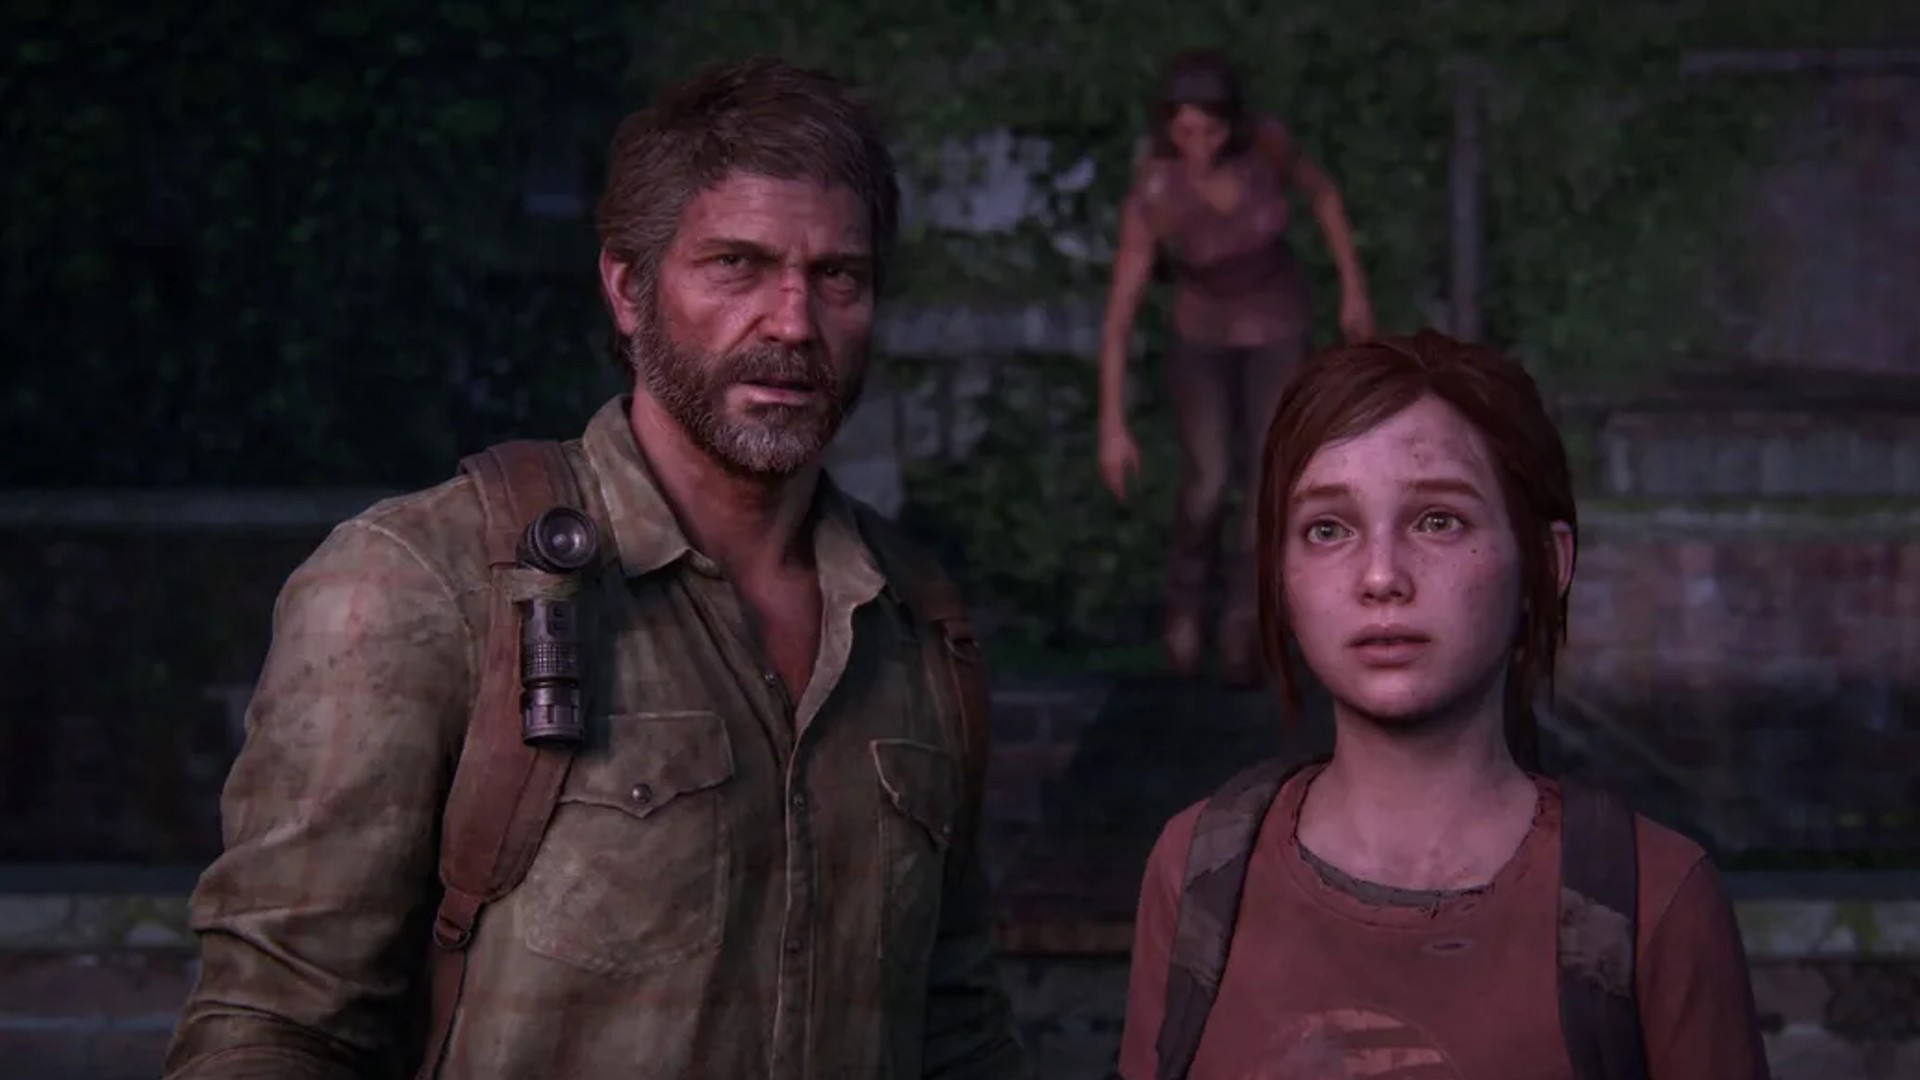 The Last of Us gets massive frame rate boost, thanks to AMD